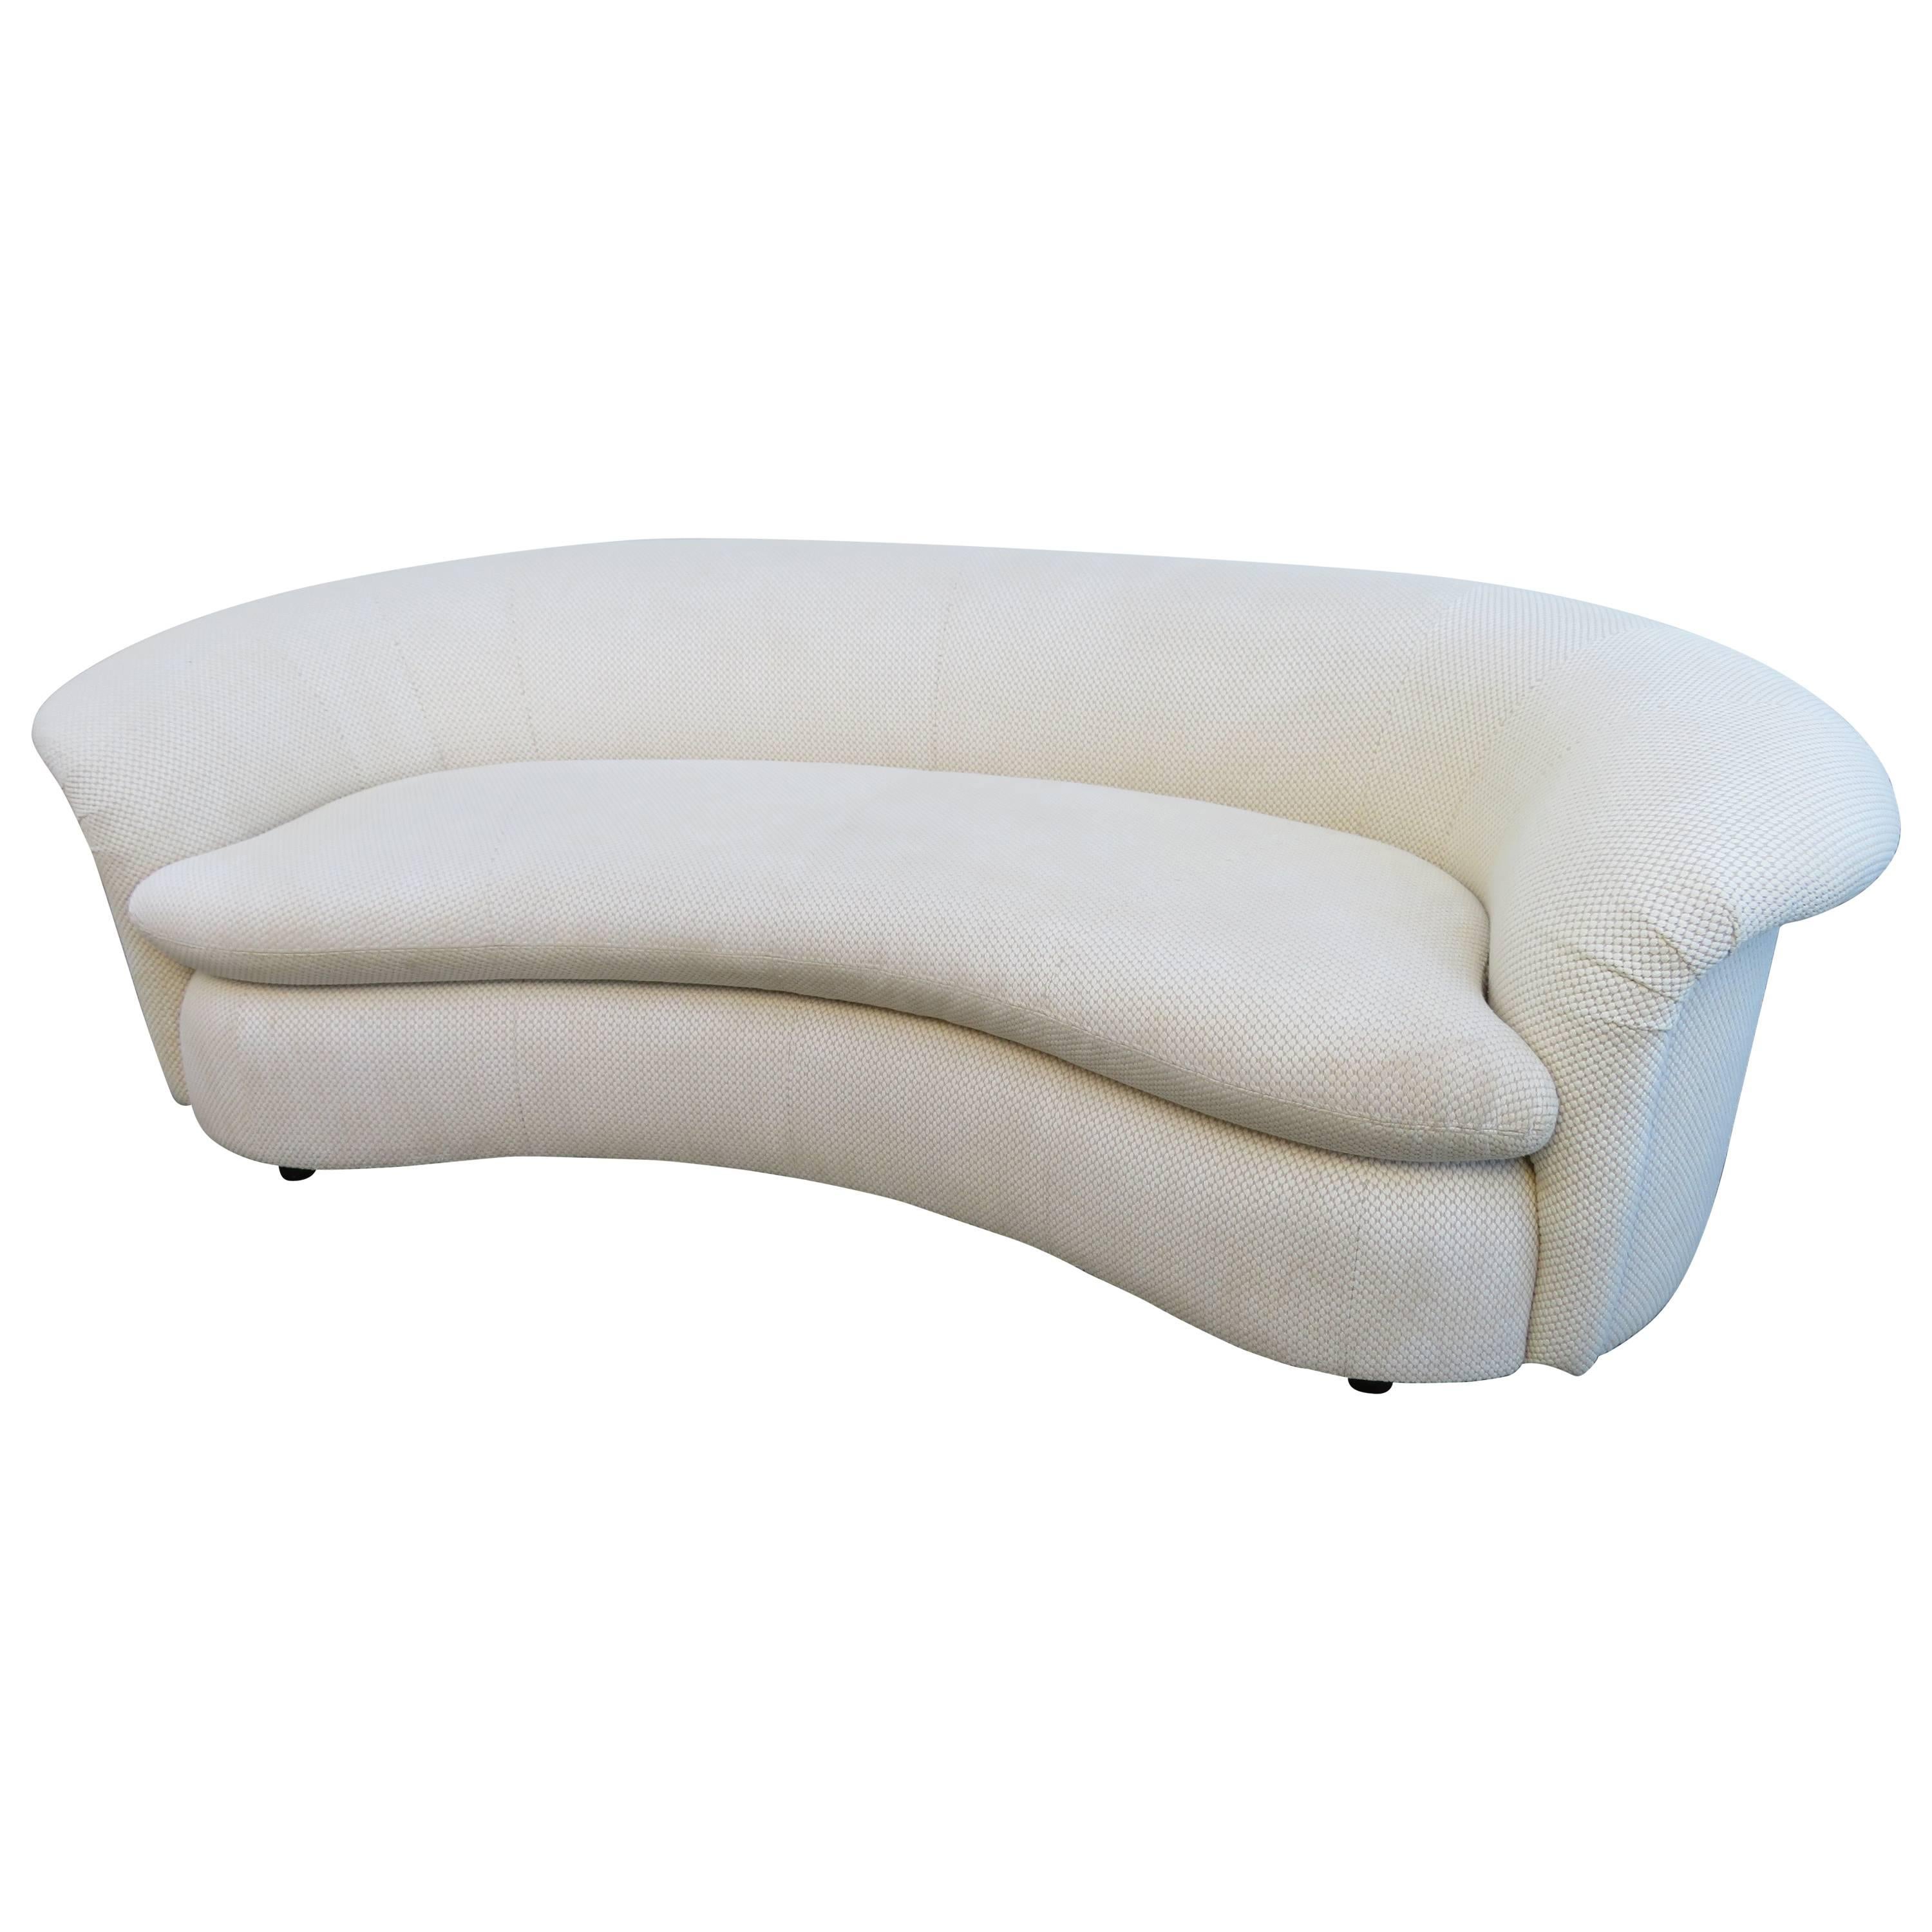 Lovely Curved Kidney Shaped Sofa Preview, Midcentury